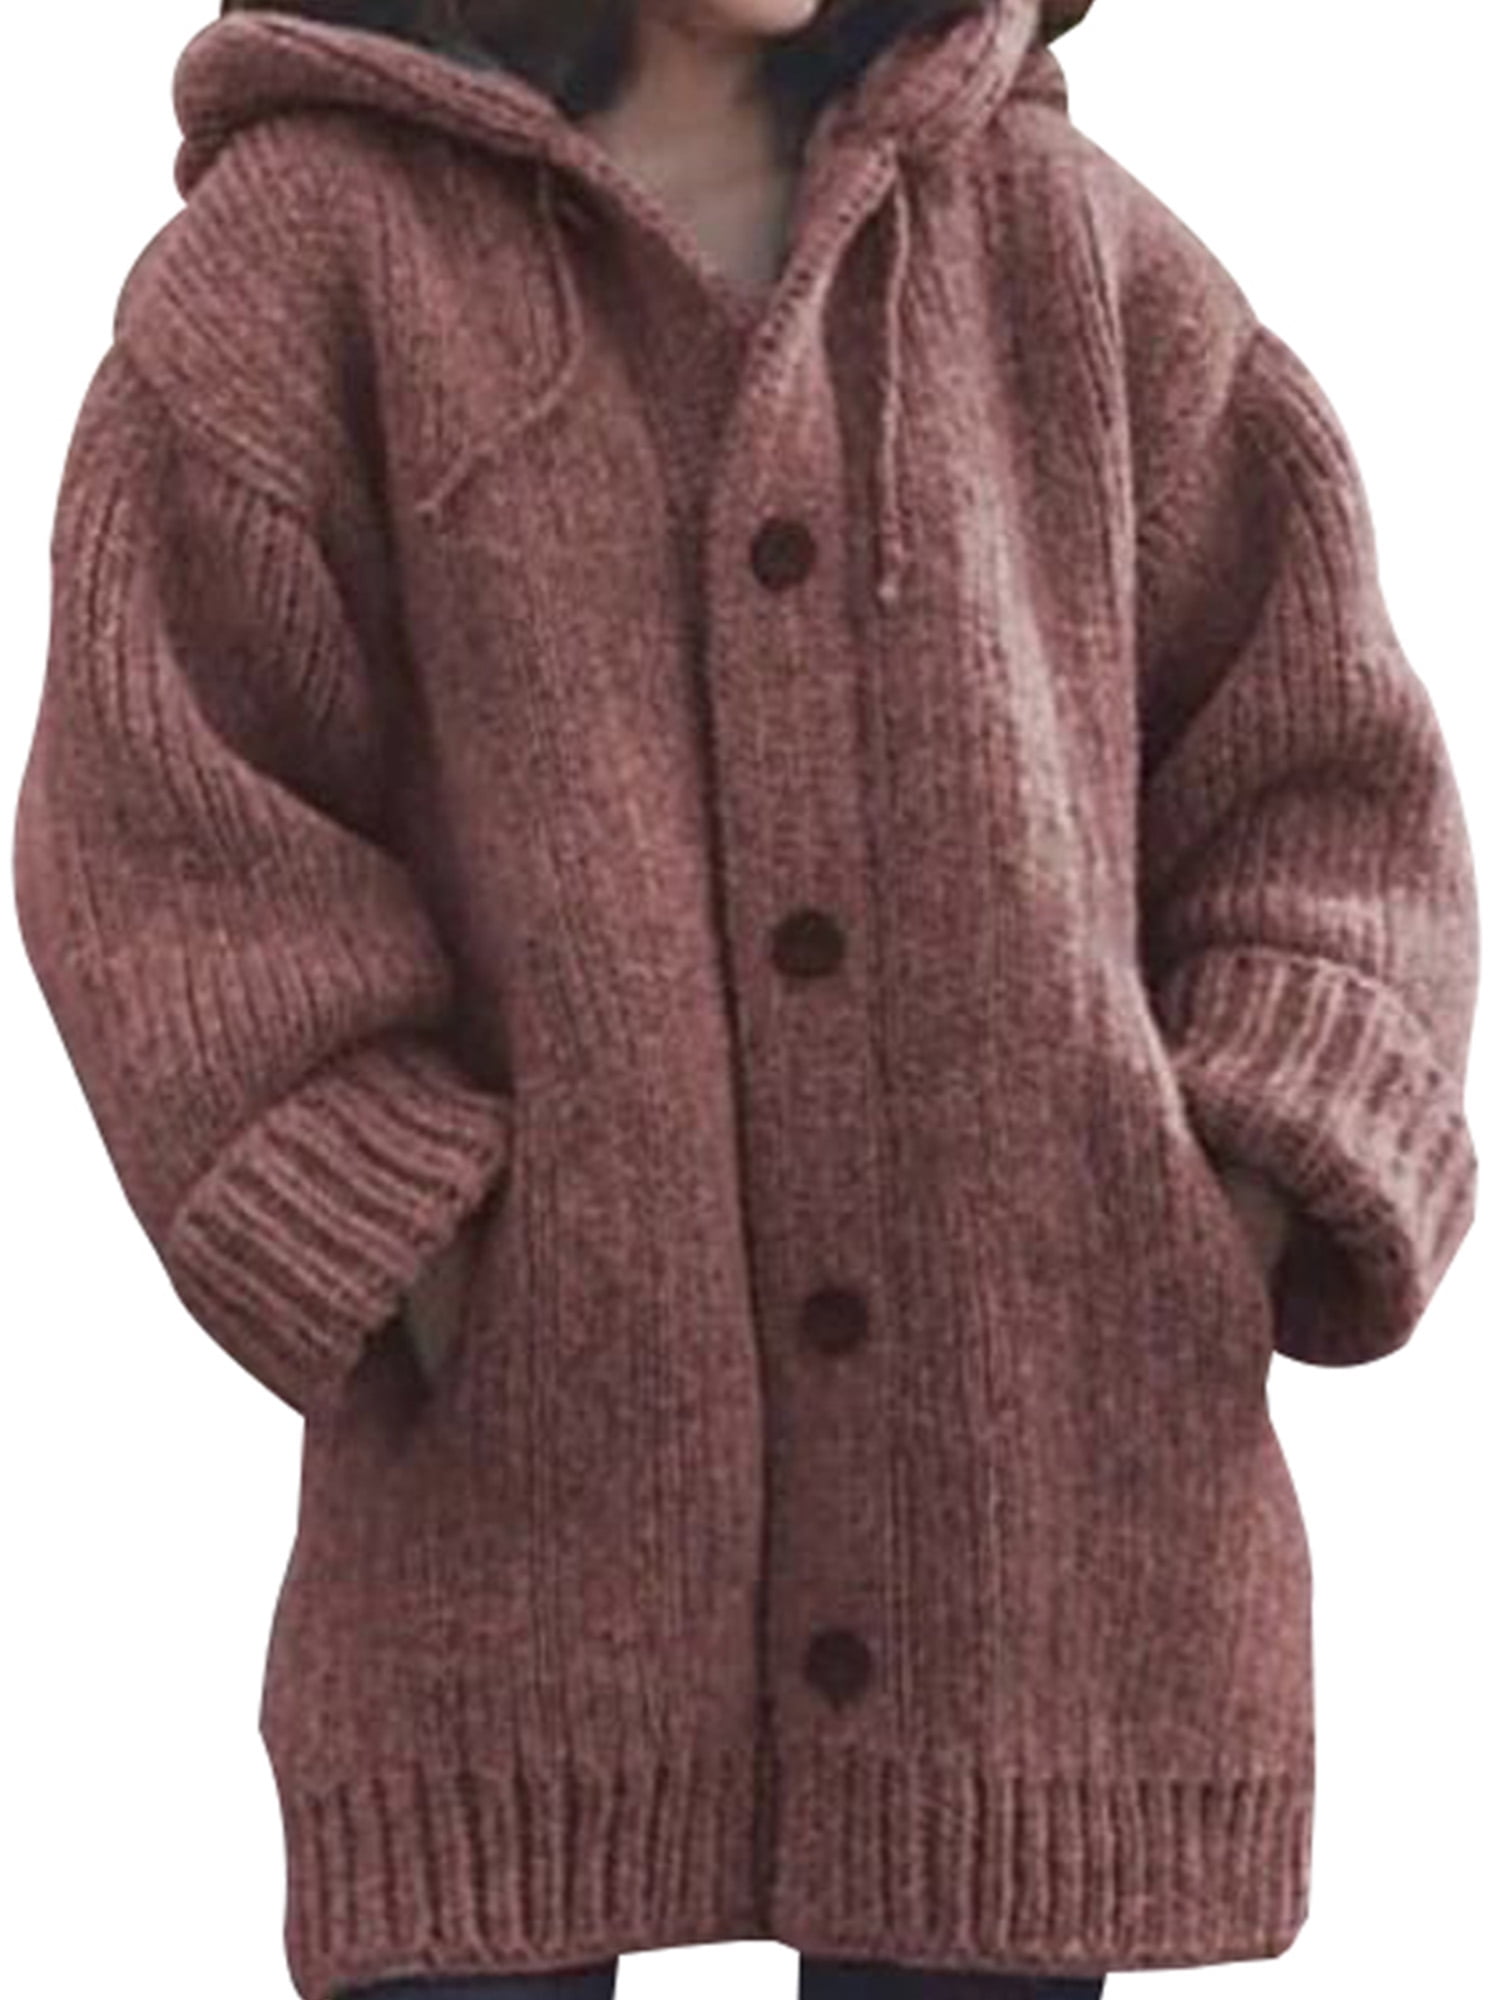 Mens Chunky Cardigan Sweater Button Knitted Jumper Coats Jacket Winter Warm Tops 